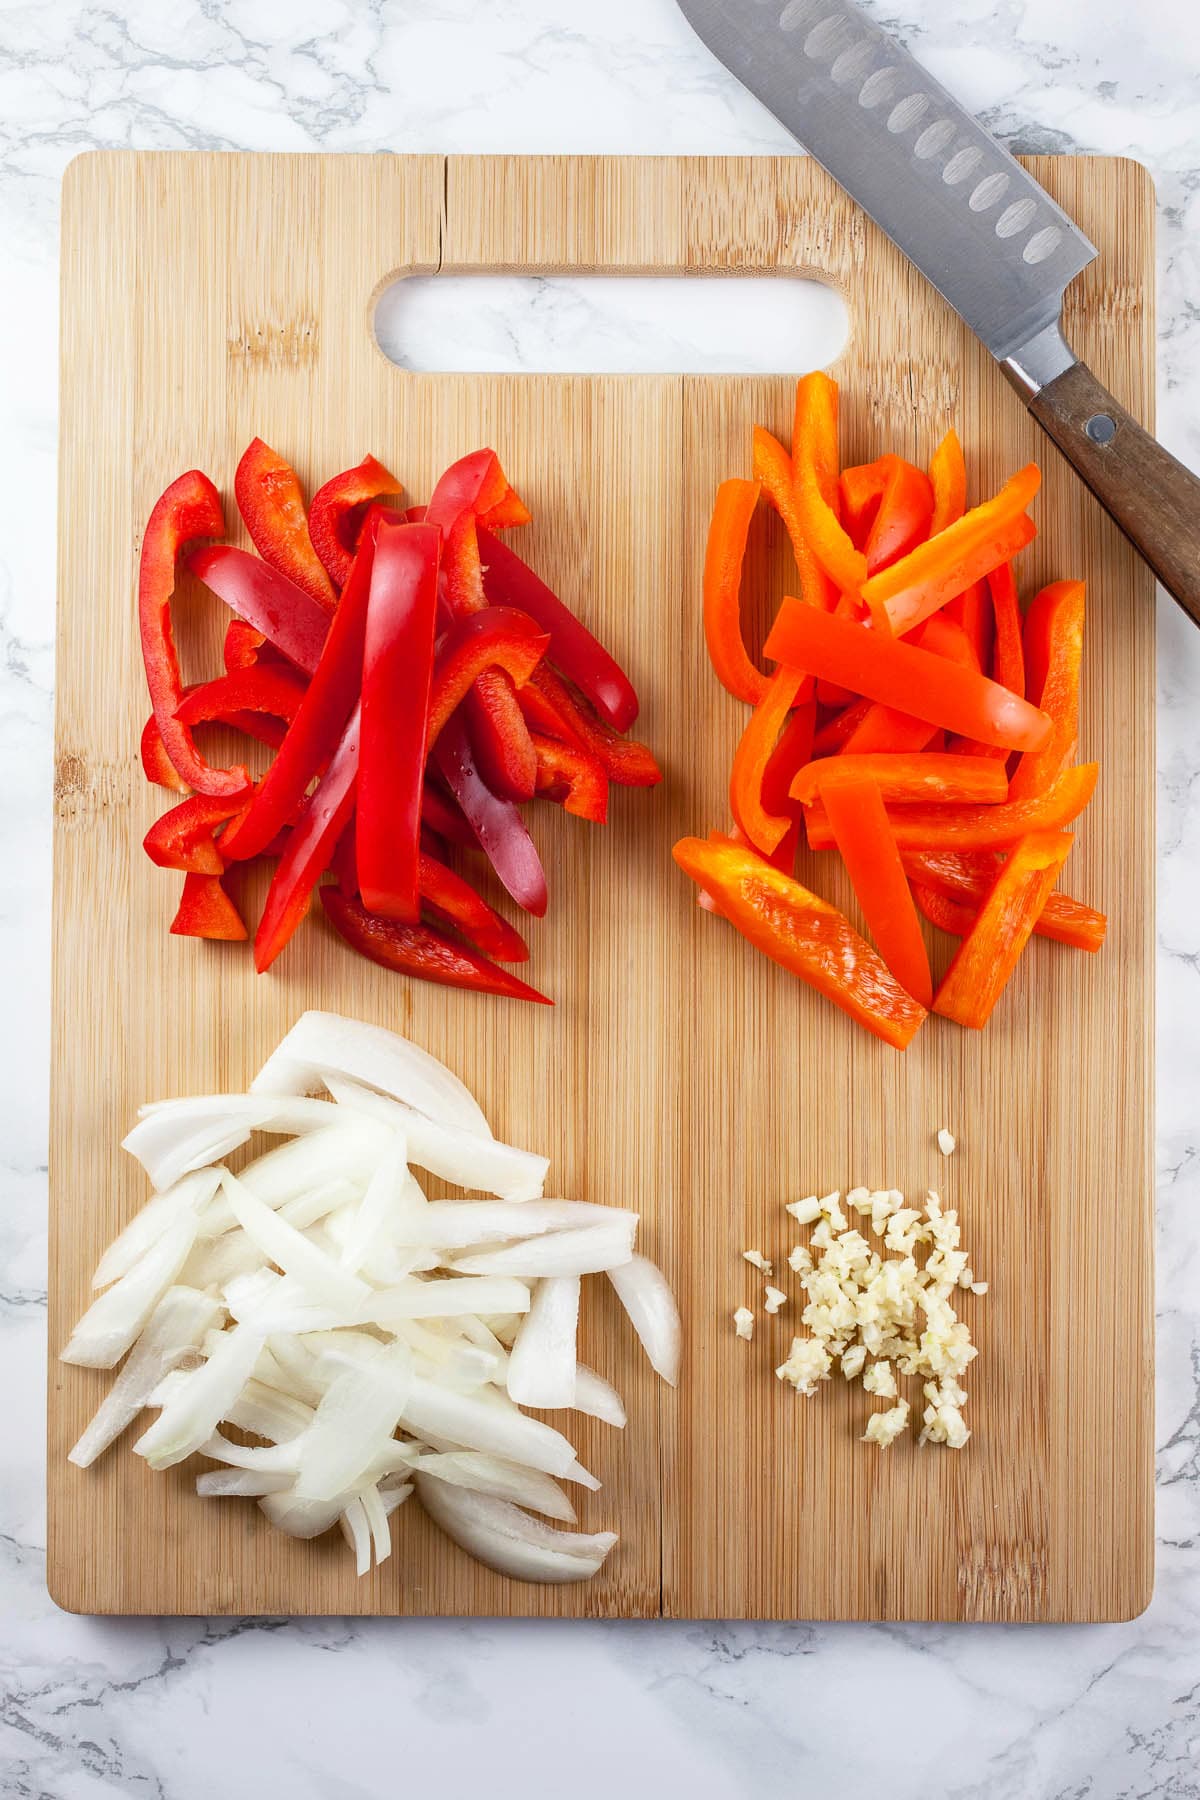 Minced garlic and sliced onions and red and orange bell peppers on wooden cutting board with knife.